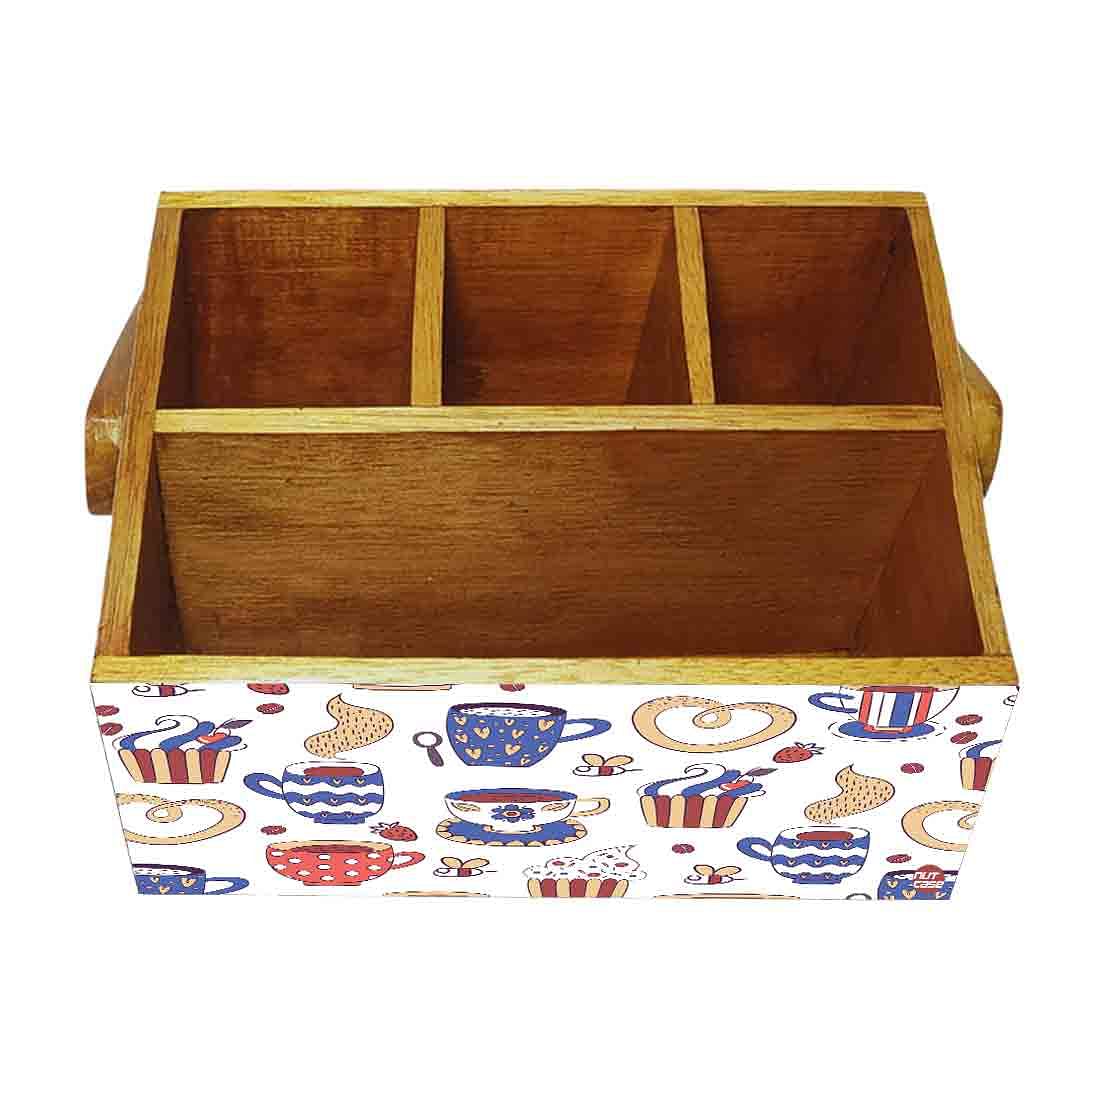 Wooden Cutlery Box for Storage With Handle Spoons Napkin Stand - Tea Cup Nutcase